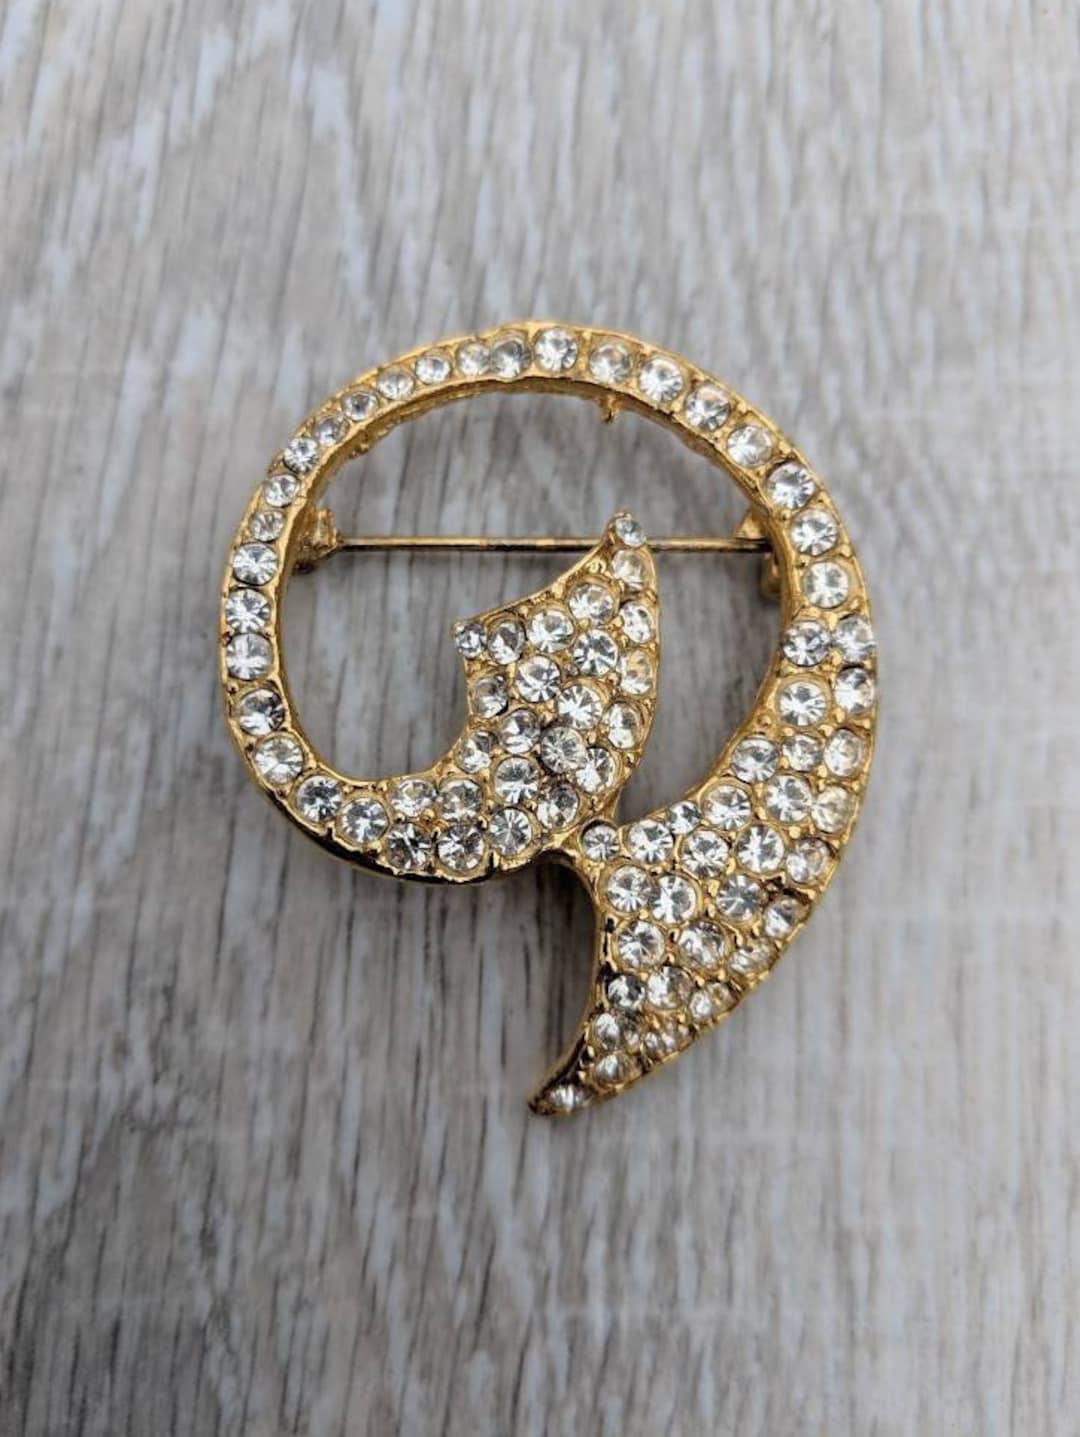 Totally Dazzled Brooches Wholesale | Gold Rhinestone Brooch